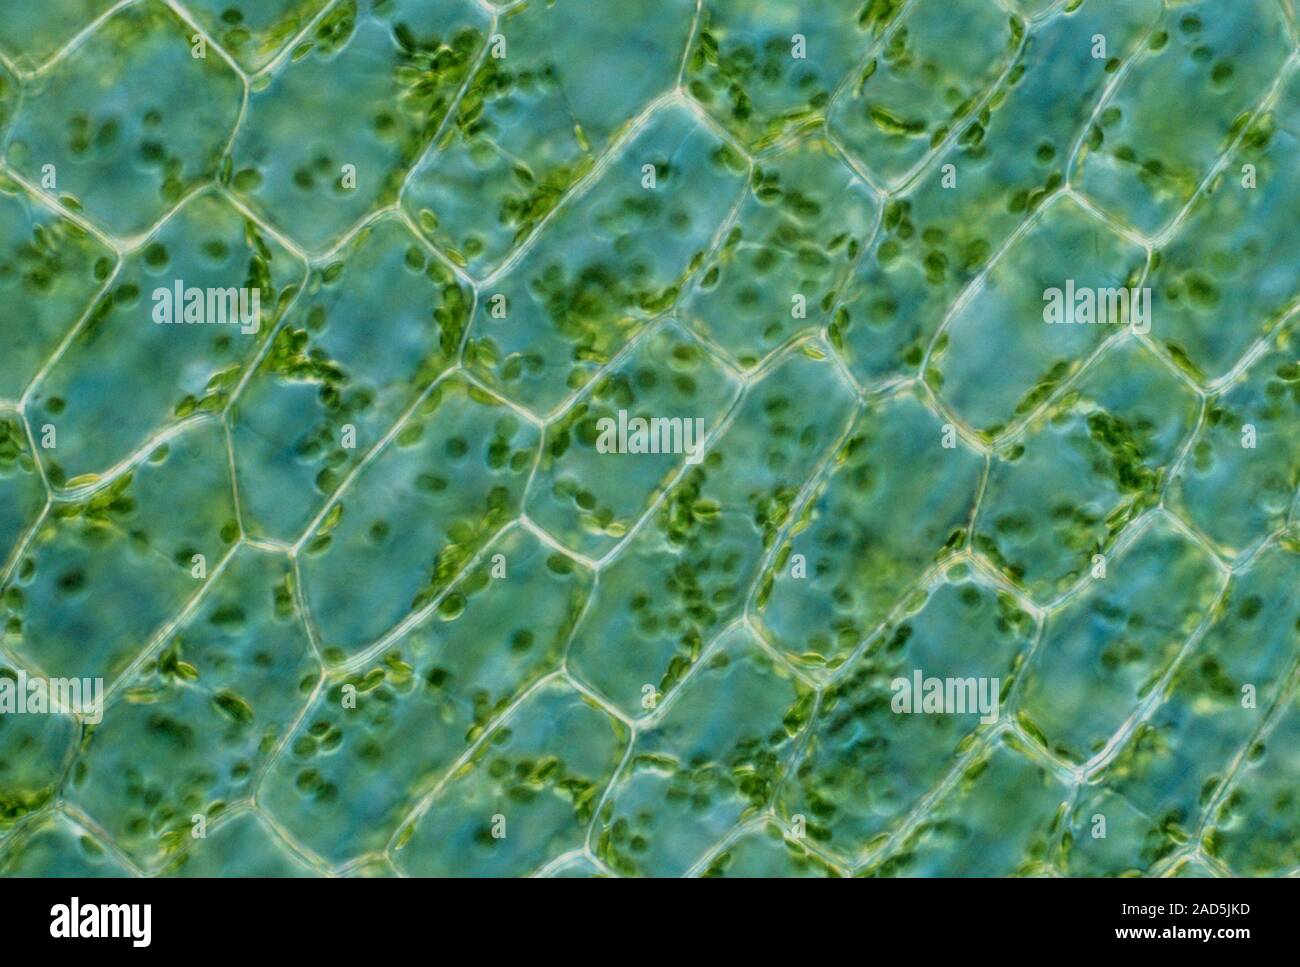 Light micrograph of a North American aquatic plant (Elodea canadensis) leaf cells containing chloroplasts. The tiny green discs within the cells are c Stock Photo